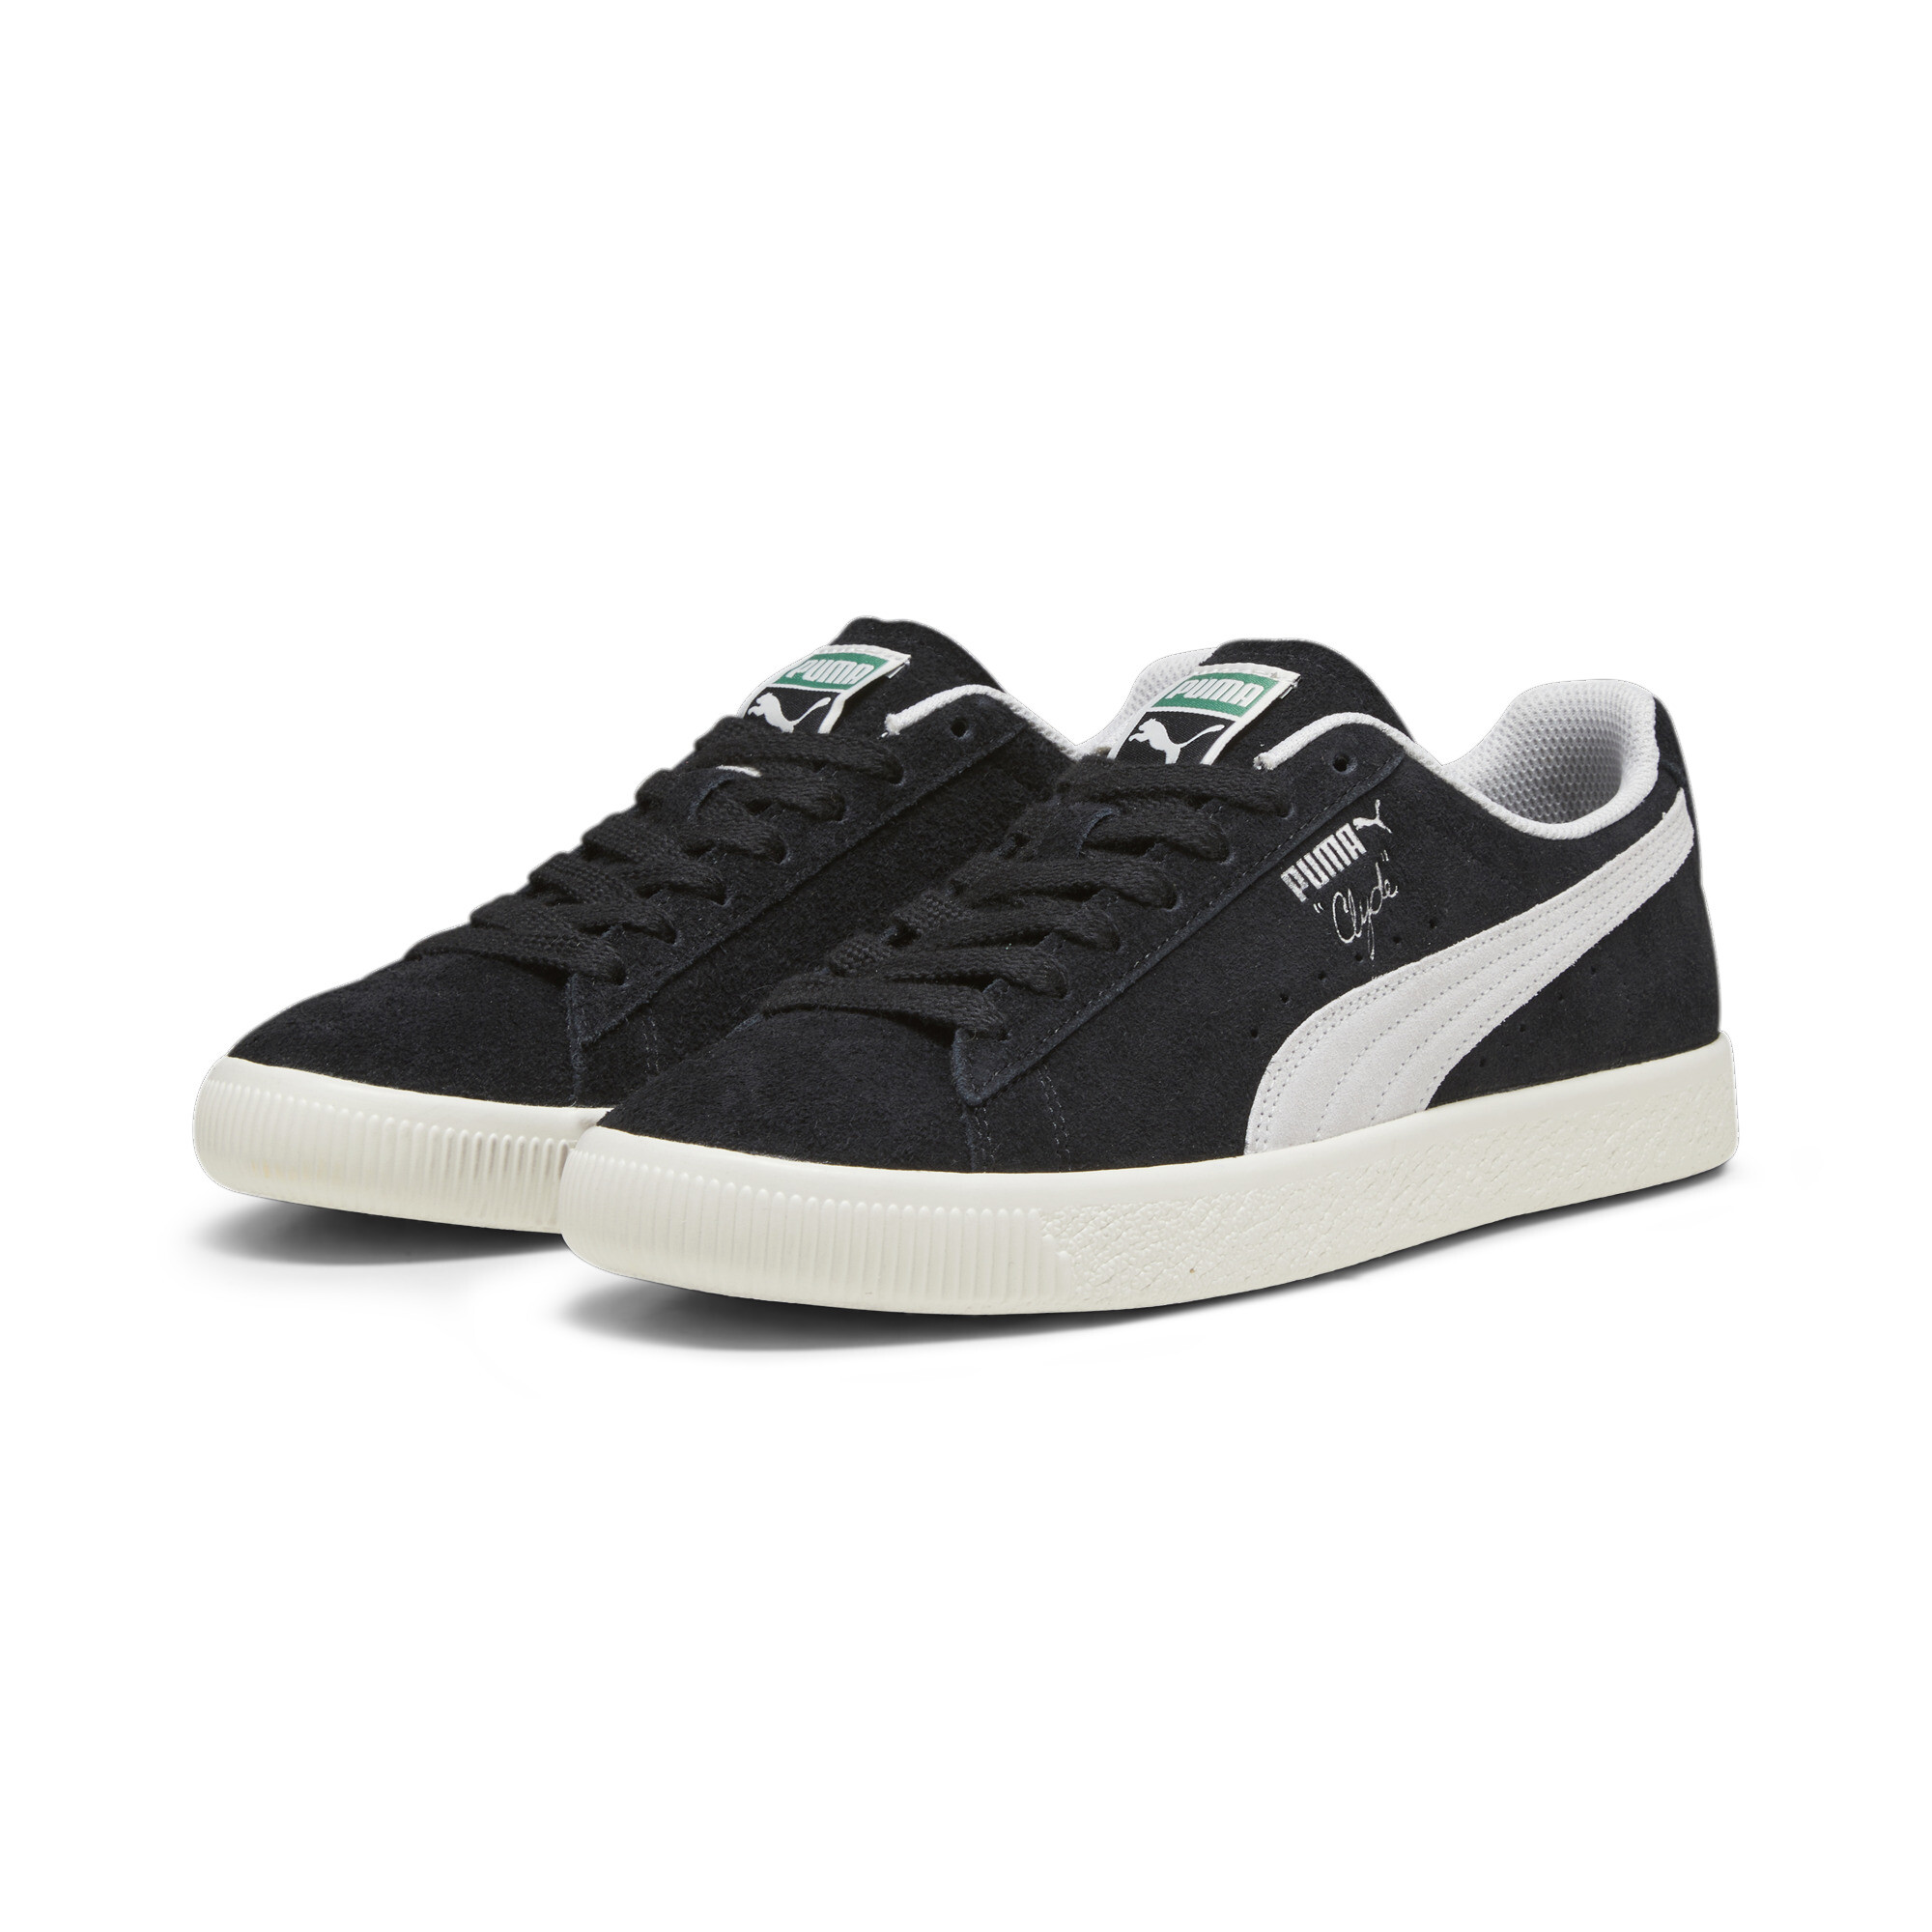 Men's PUMA Clyde Hairy Suede Sneakers In Black, Size EU 41